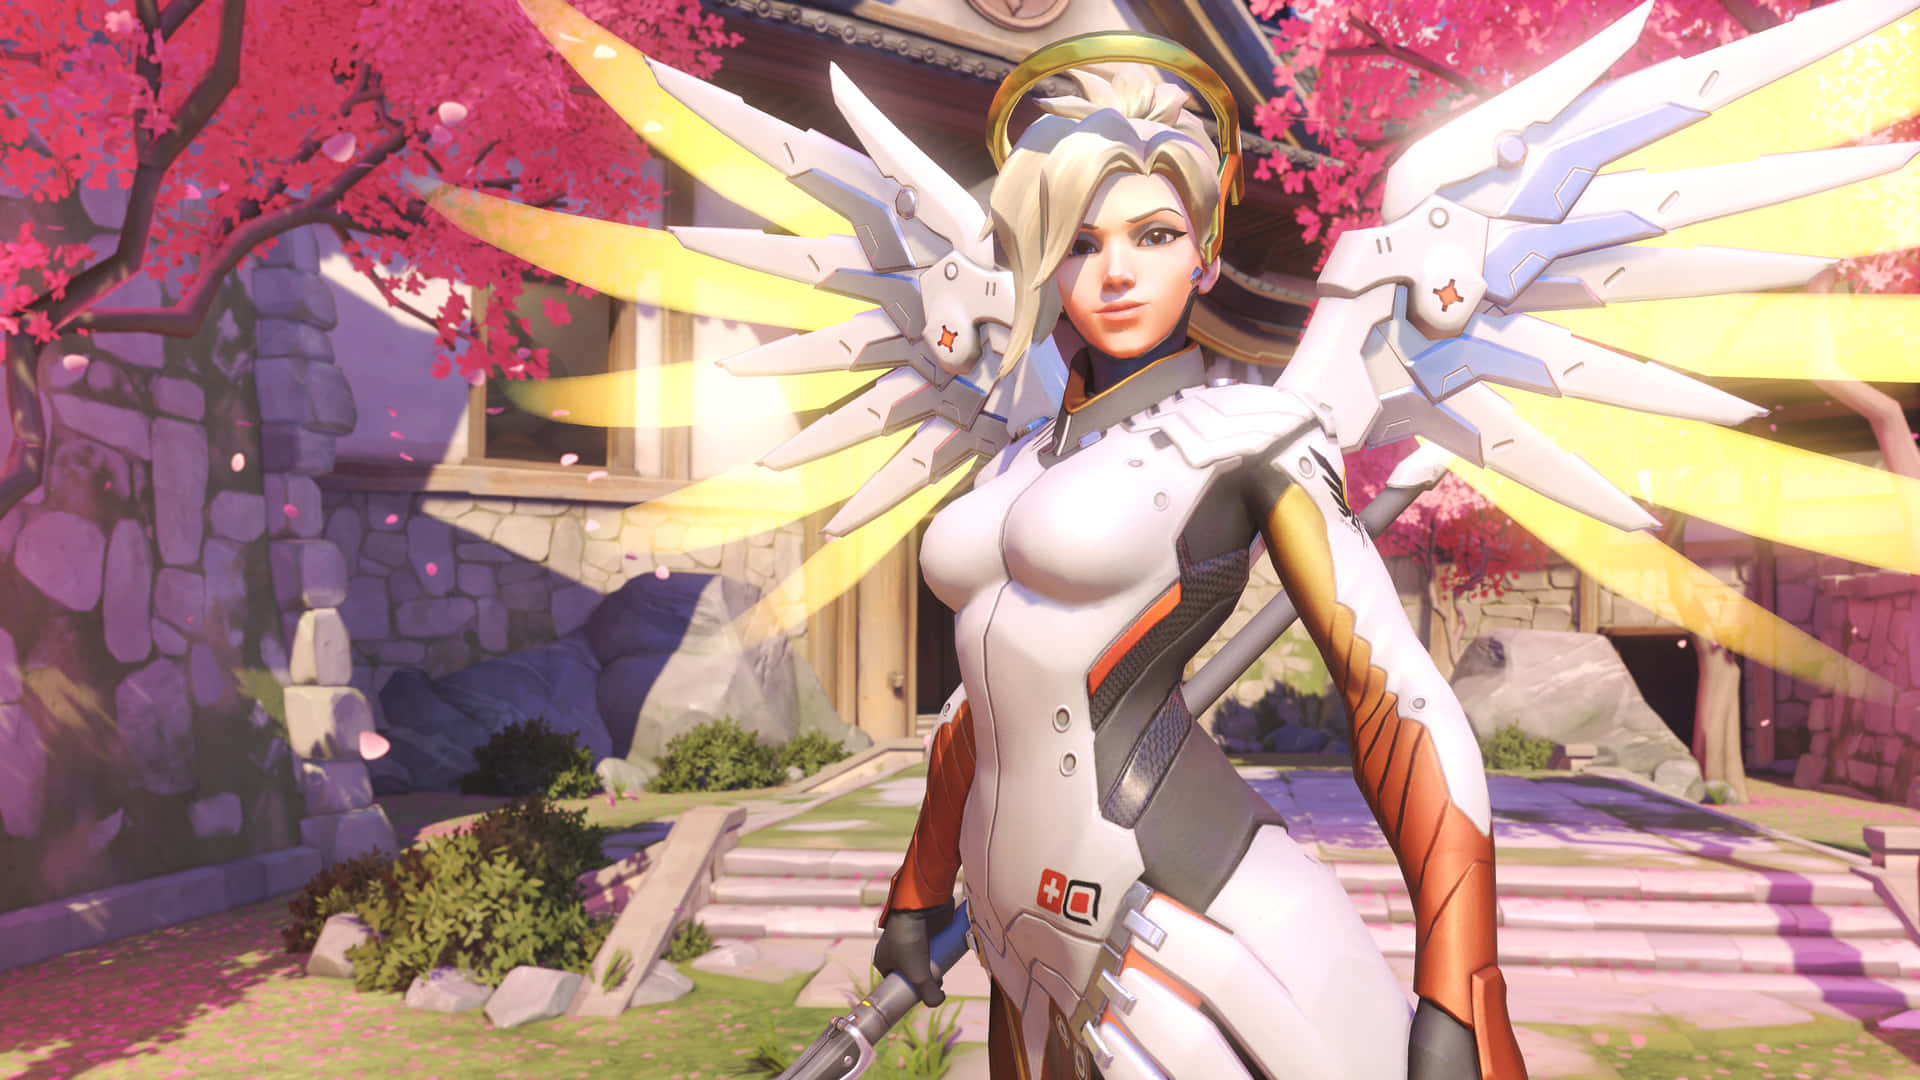 Support the team with Mercy's powerful healing capabilities in Overwatch. Wallpaper